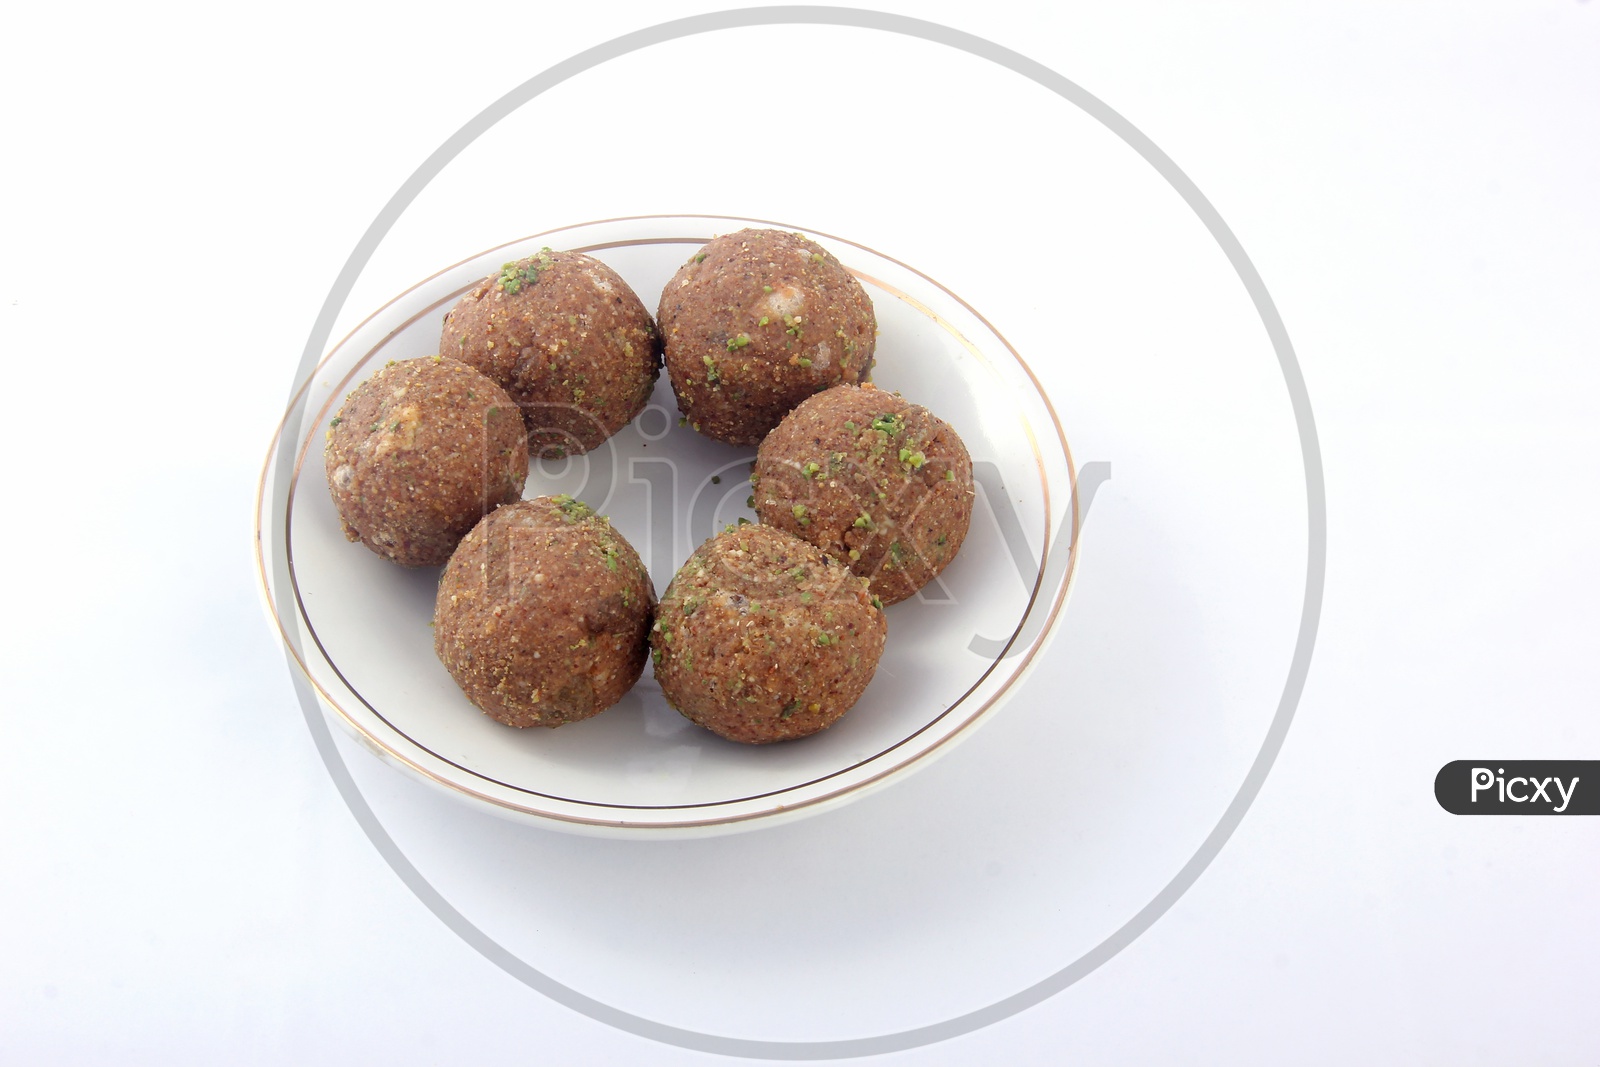 Dry Fruit Laddu in a Plate l on a Isolated White Background